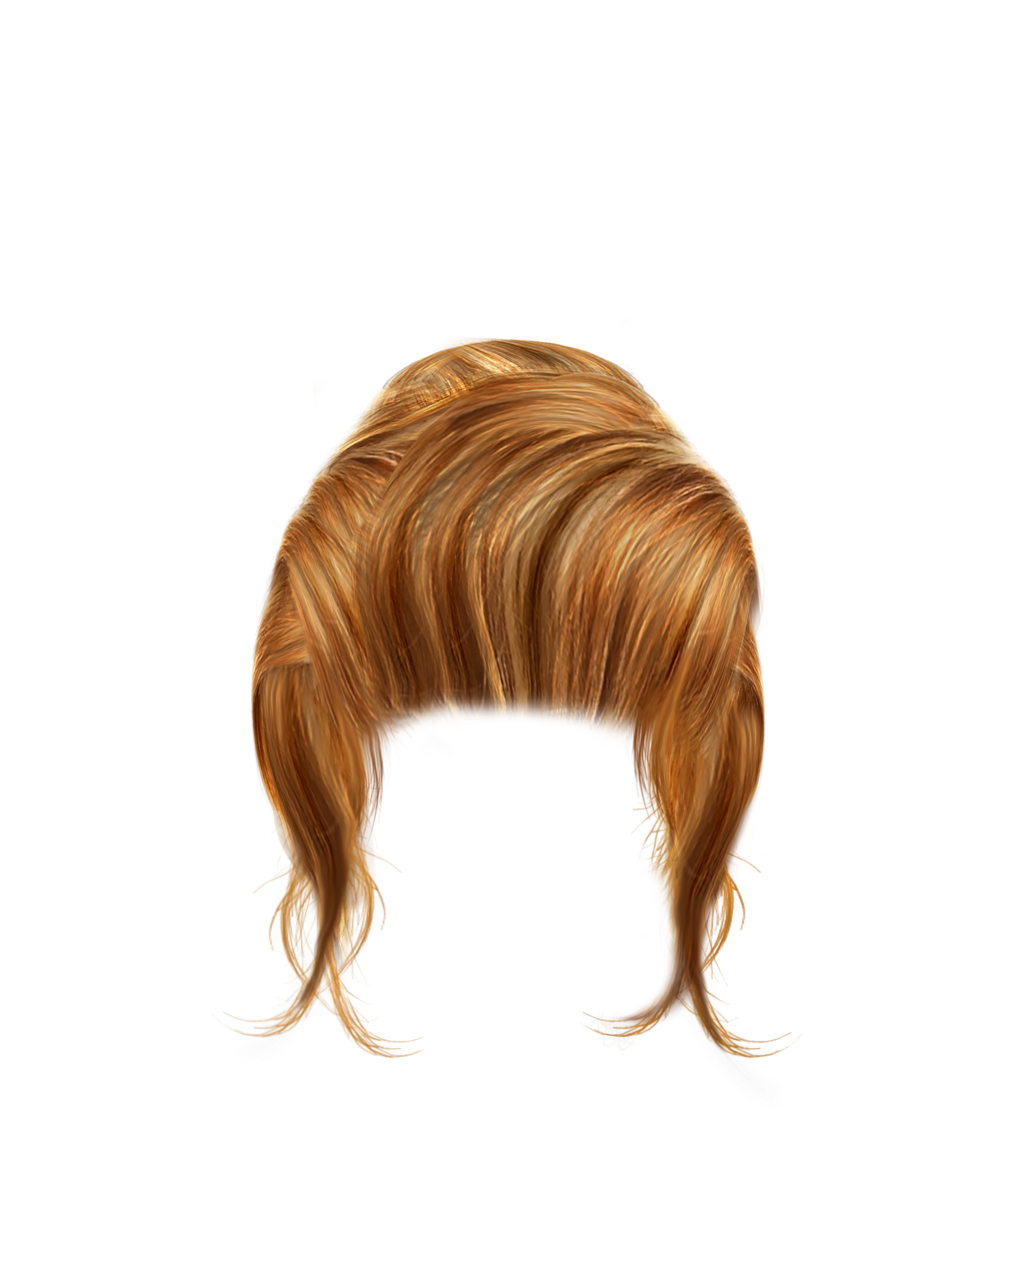 Women hair PNG image transparent image download, size: 1024x1334px